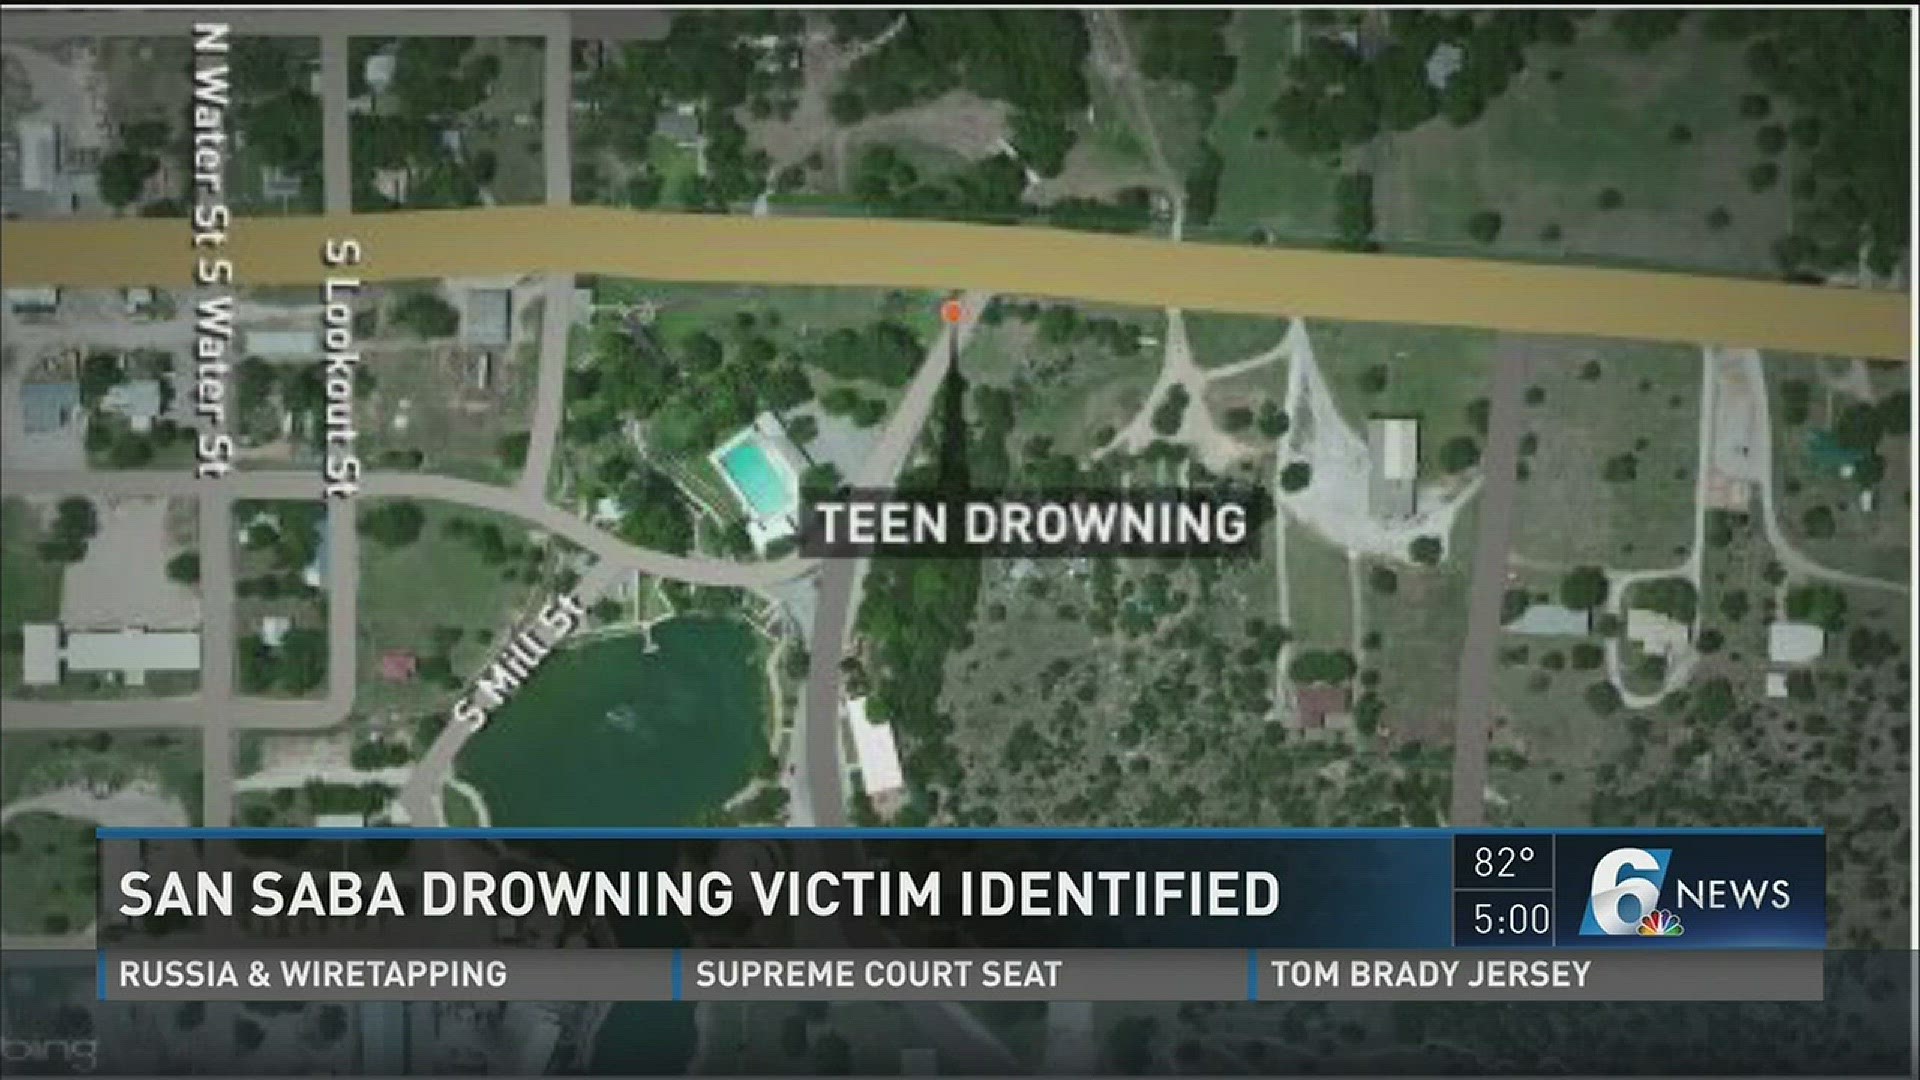 The victim: Justin Germer, 18, could not swim and got into deep water, police said.